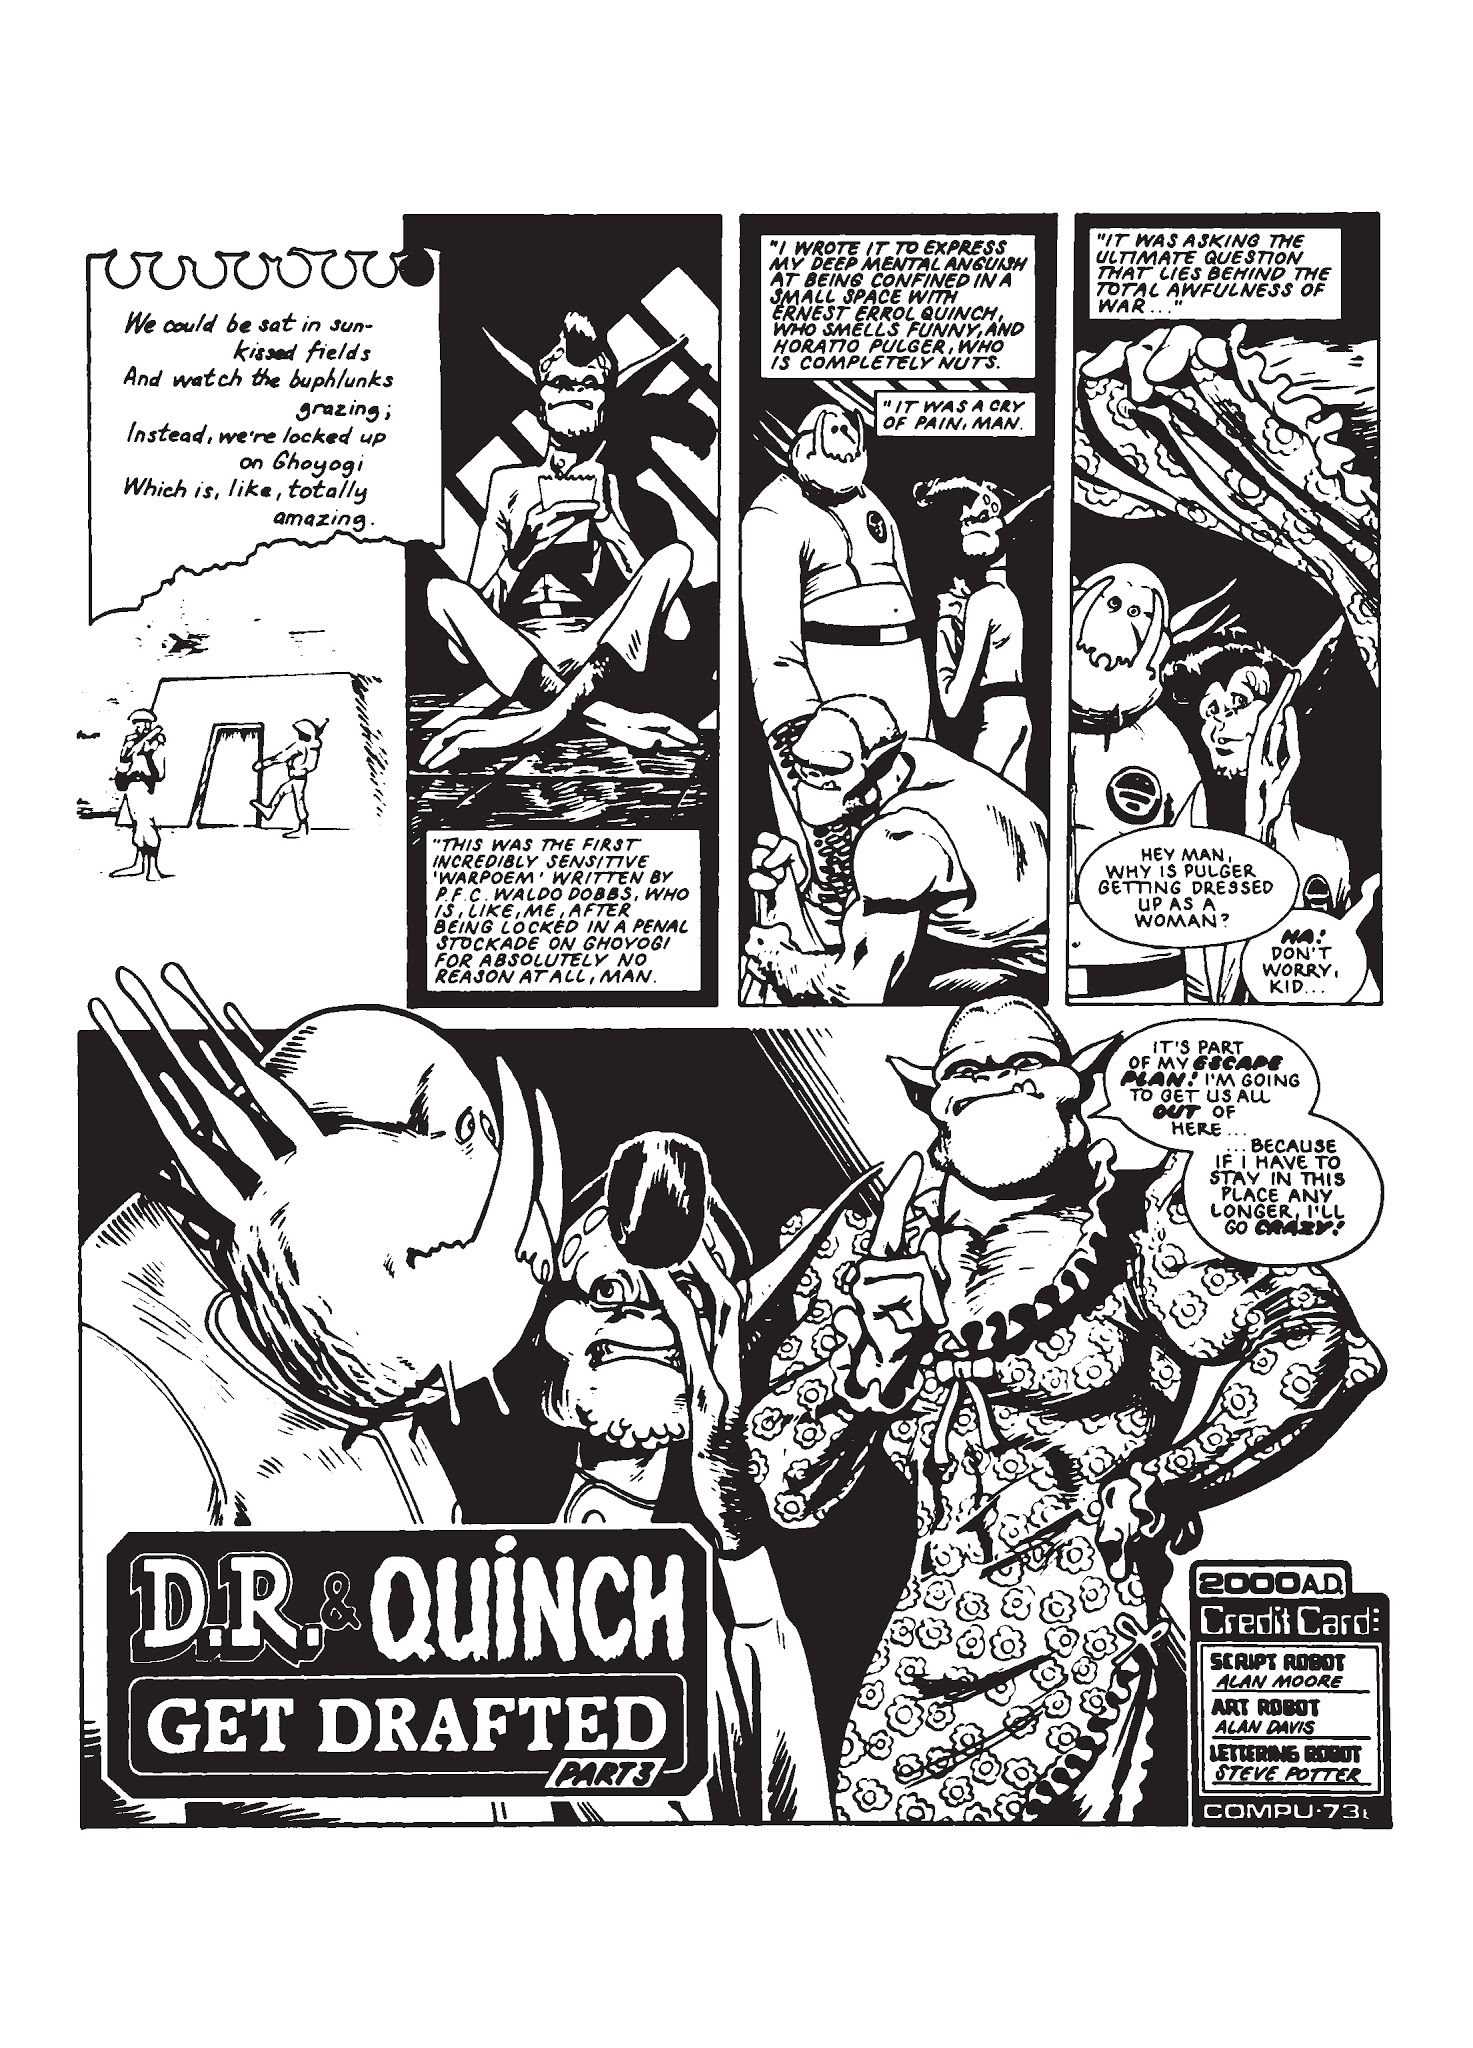 Read online The Complete D.R. & Quinch comic -  Issue # TPB - 51